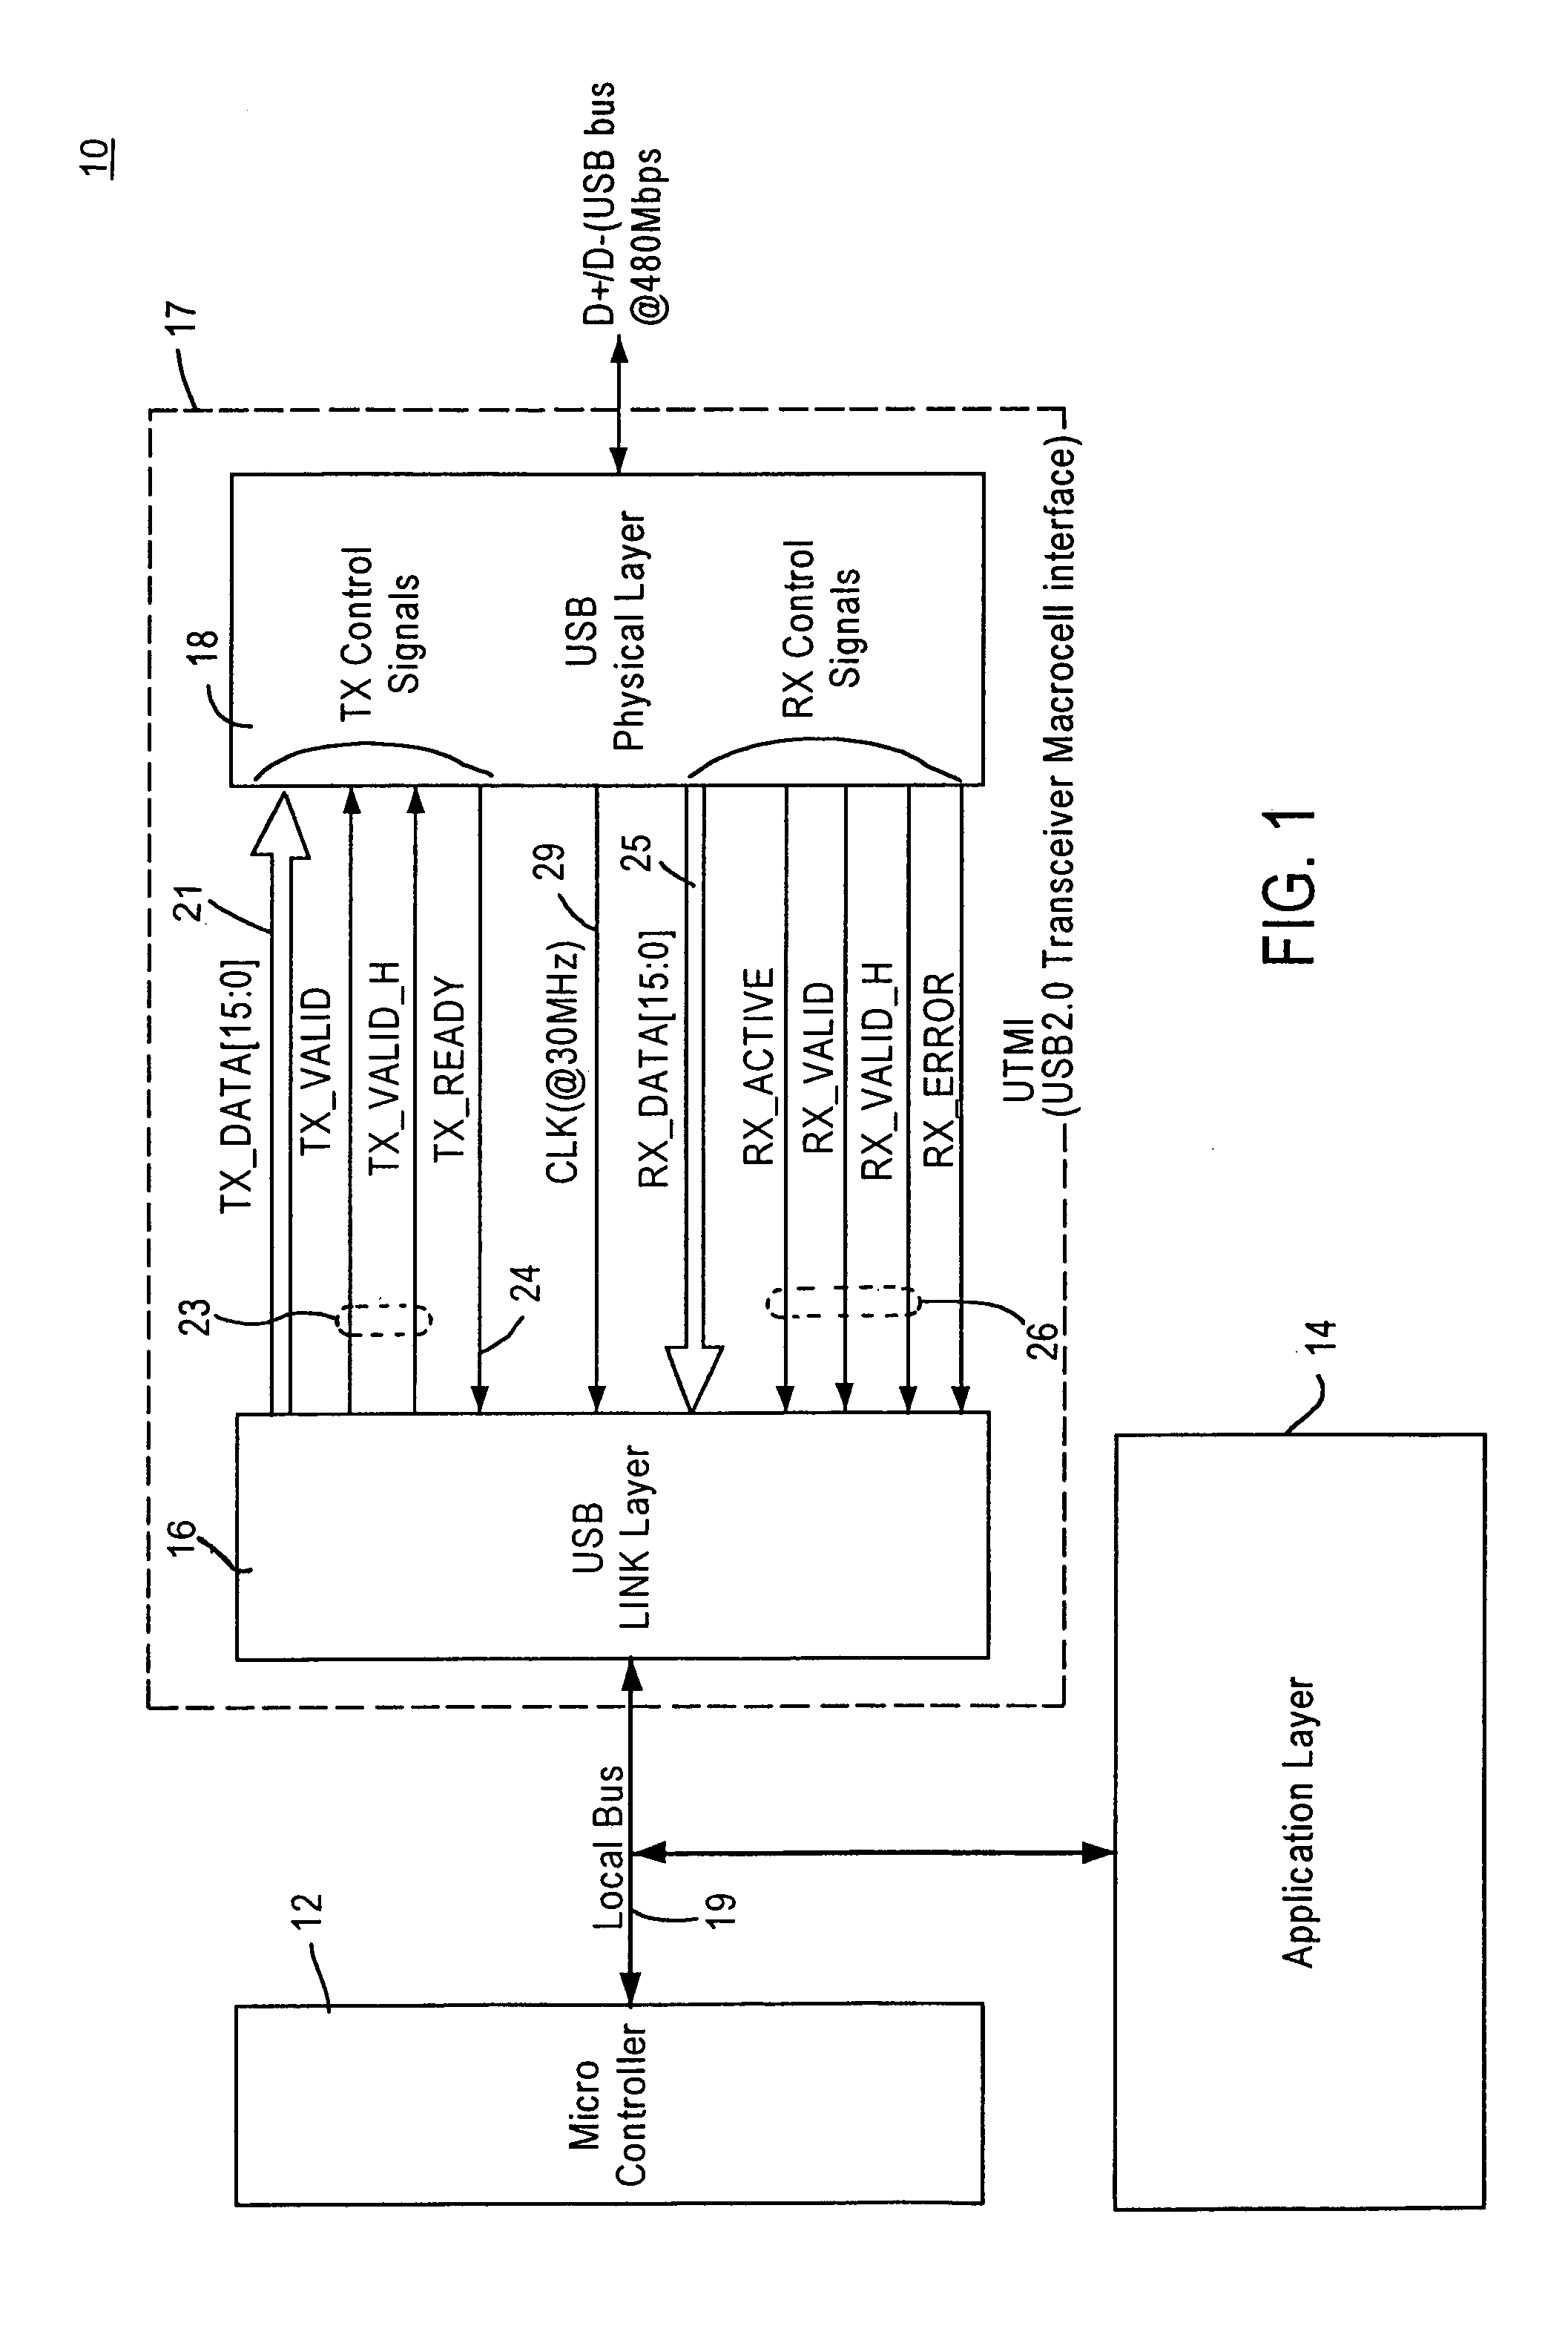 Self test circuit for evaluating a high-speed serial interface